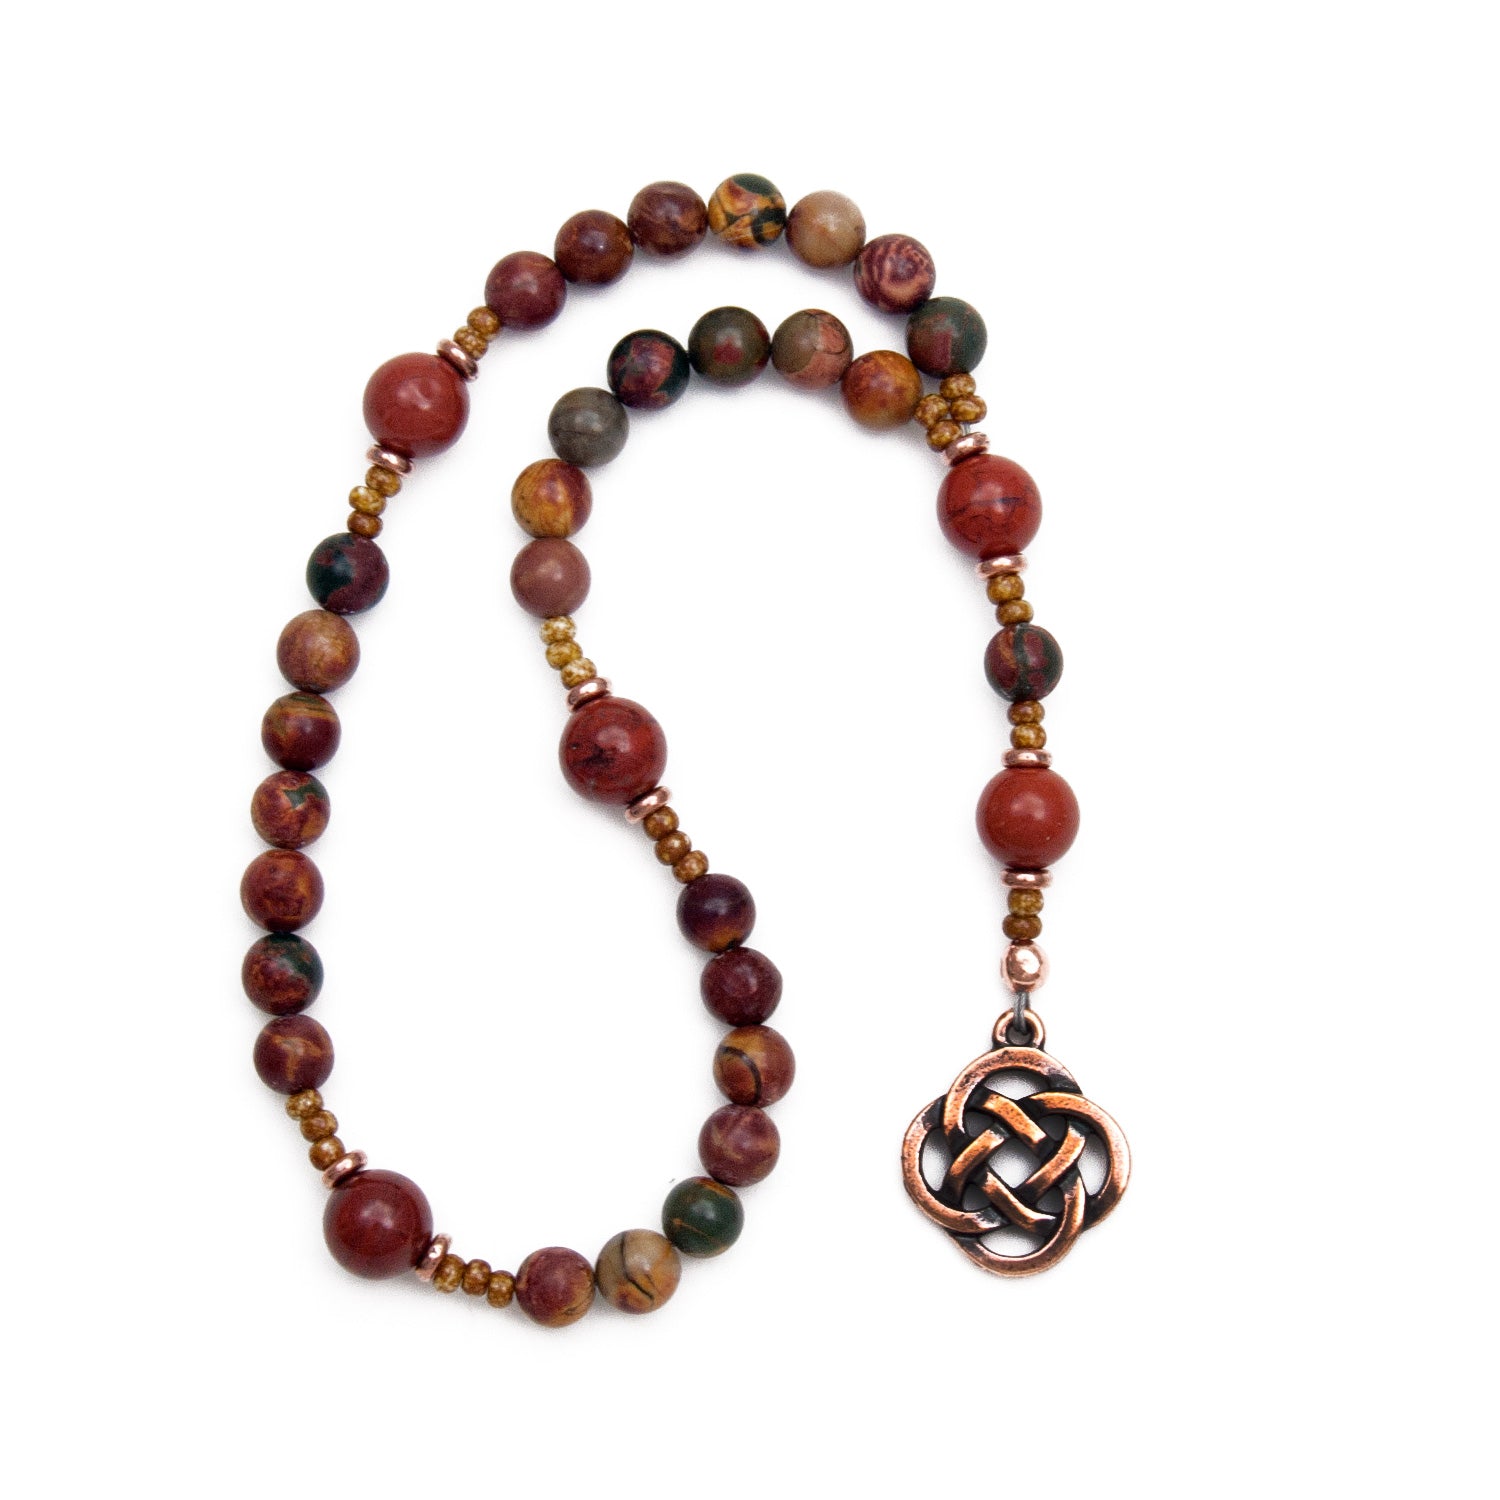 Unity Anglican Rosary by Unspoken Elements